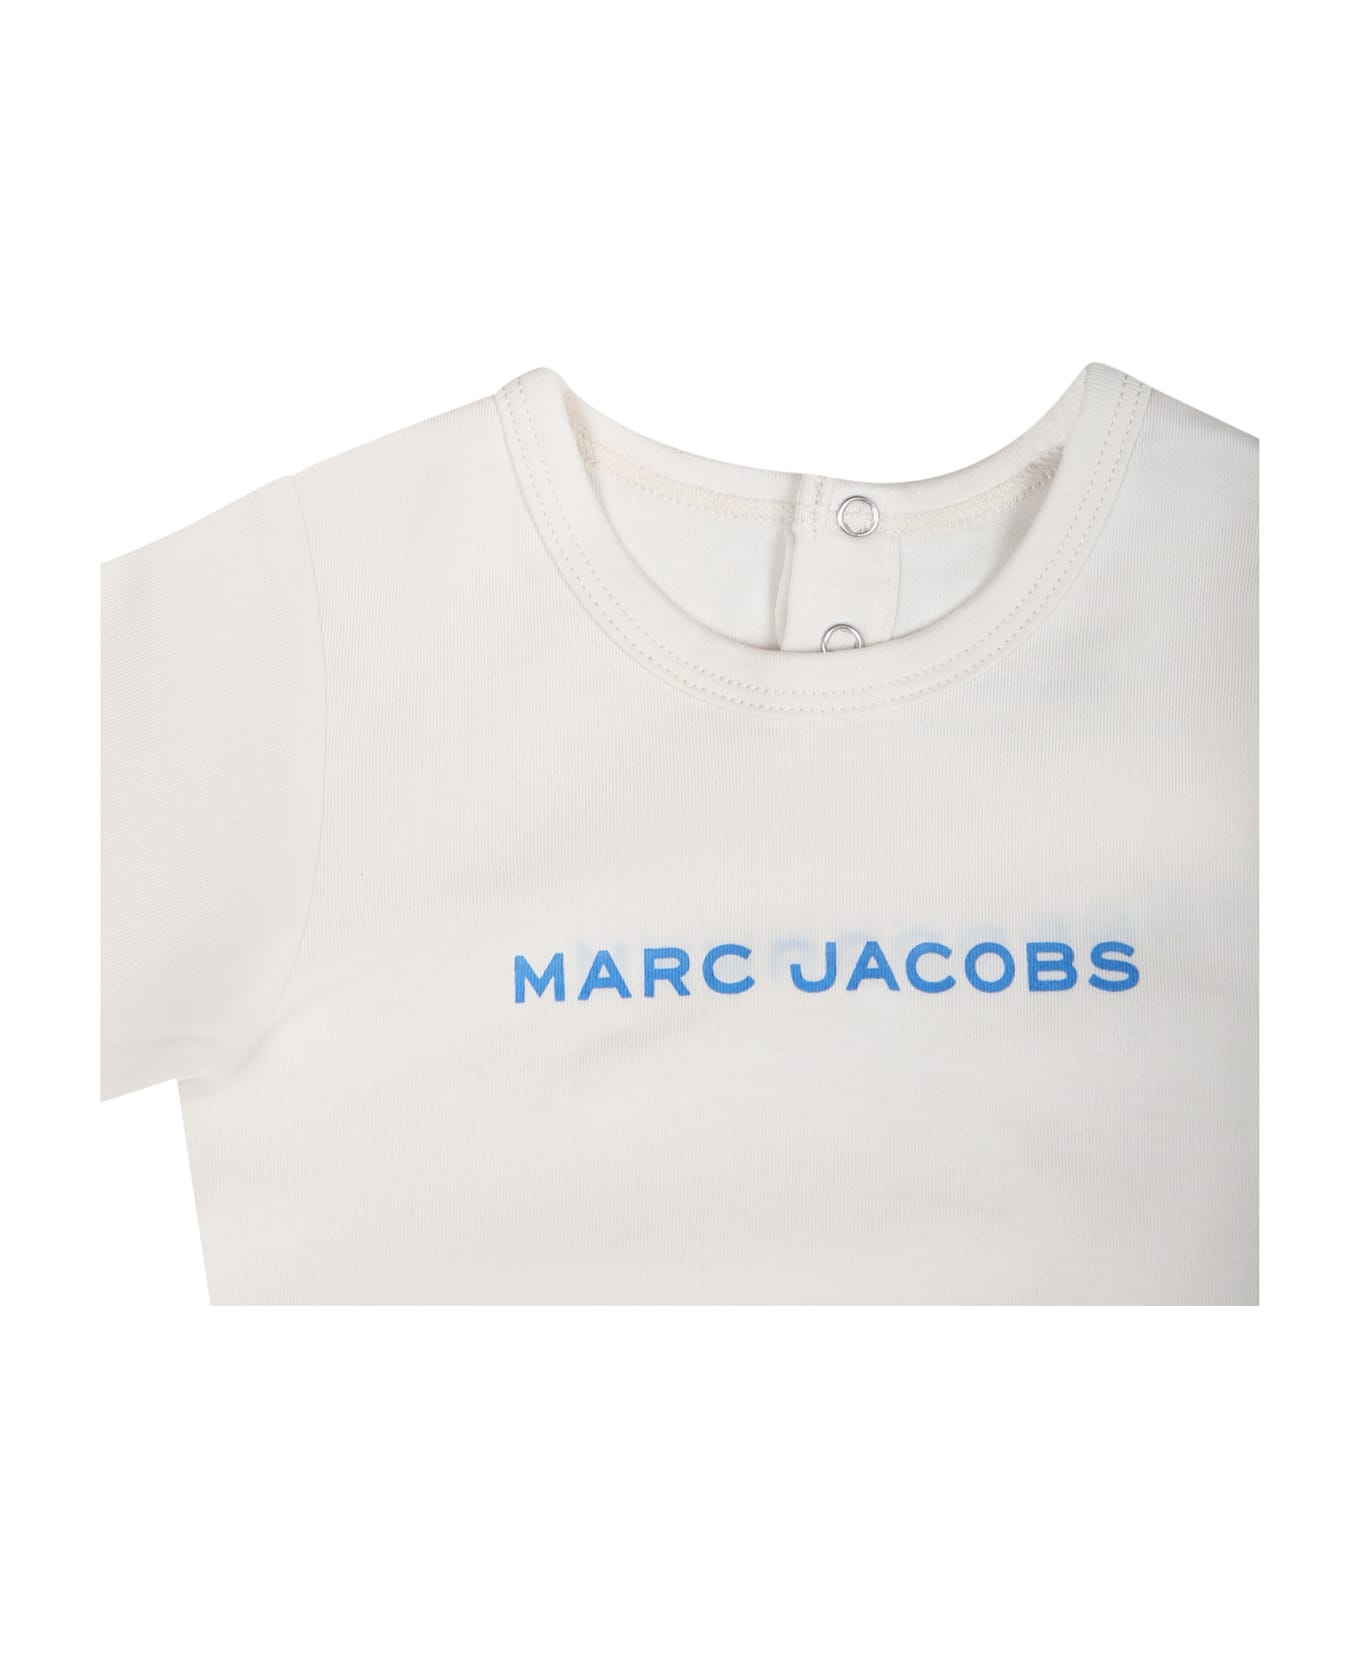 Marc Jacobs Blue Sports Outfit For Newborns With Logo - Light Blue ボトムス